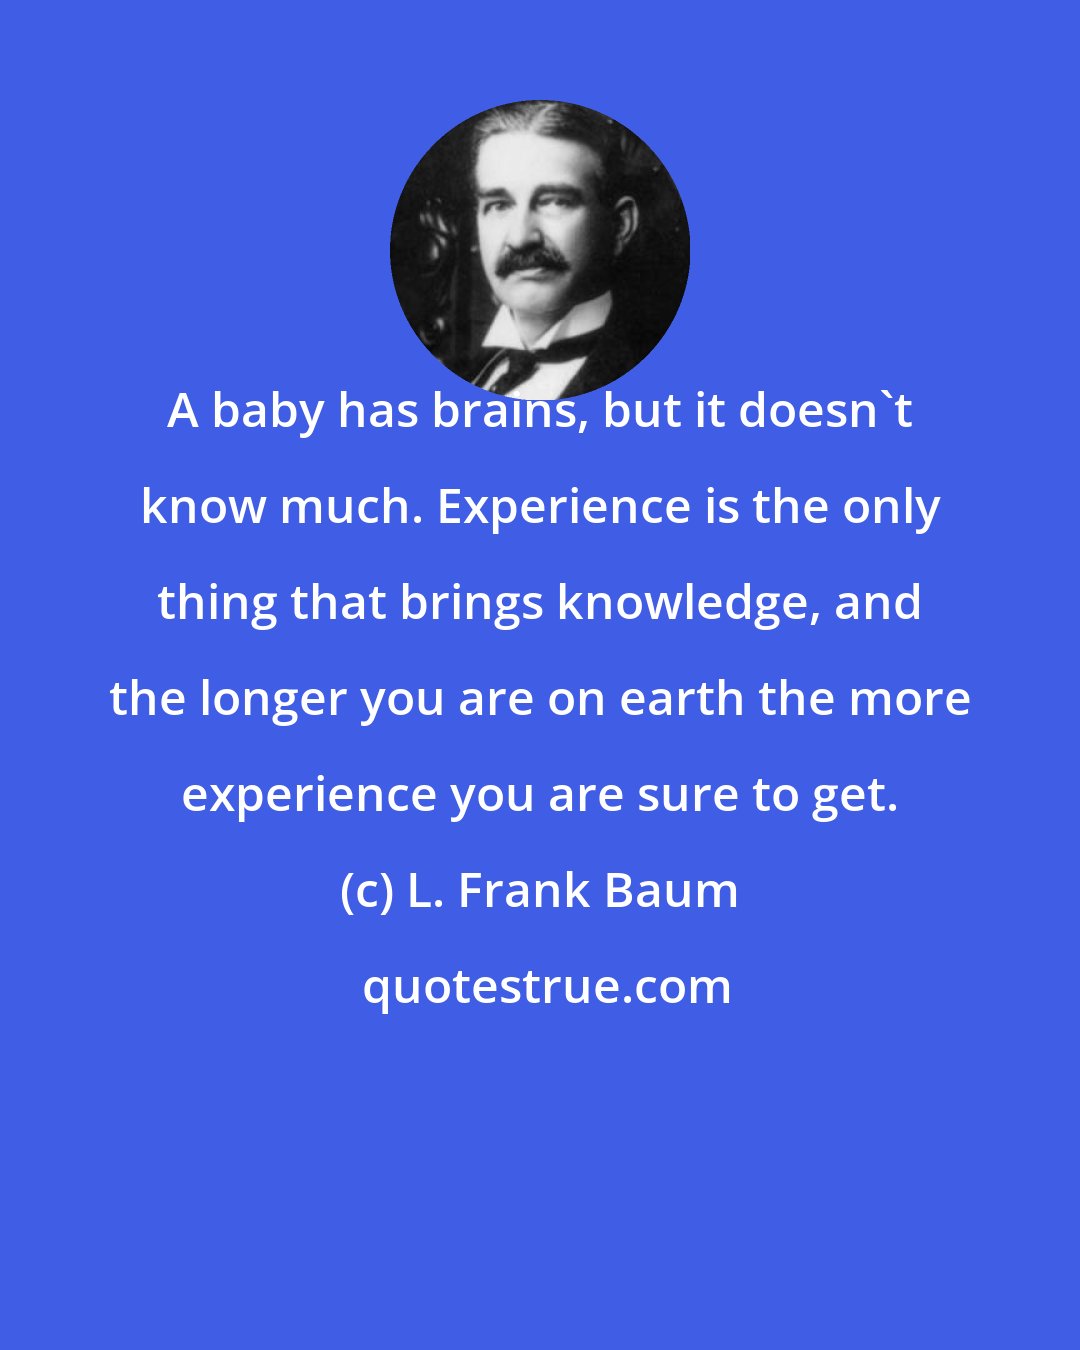 L. Frank Baum: A baby has brains, but it doesn't know much. Experience is the only thing that brings knowledge, and the longer you are on earth the more experience you are sure to get.